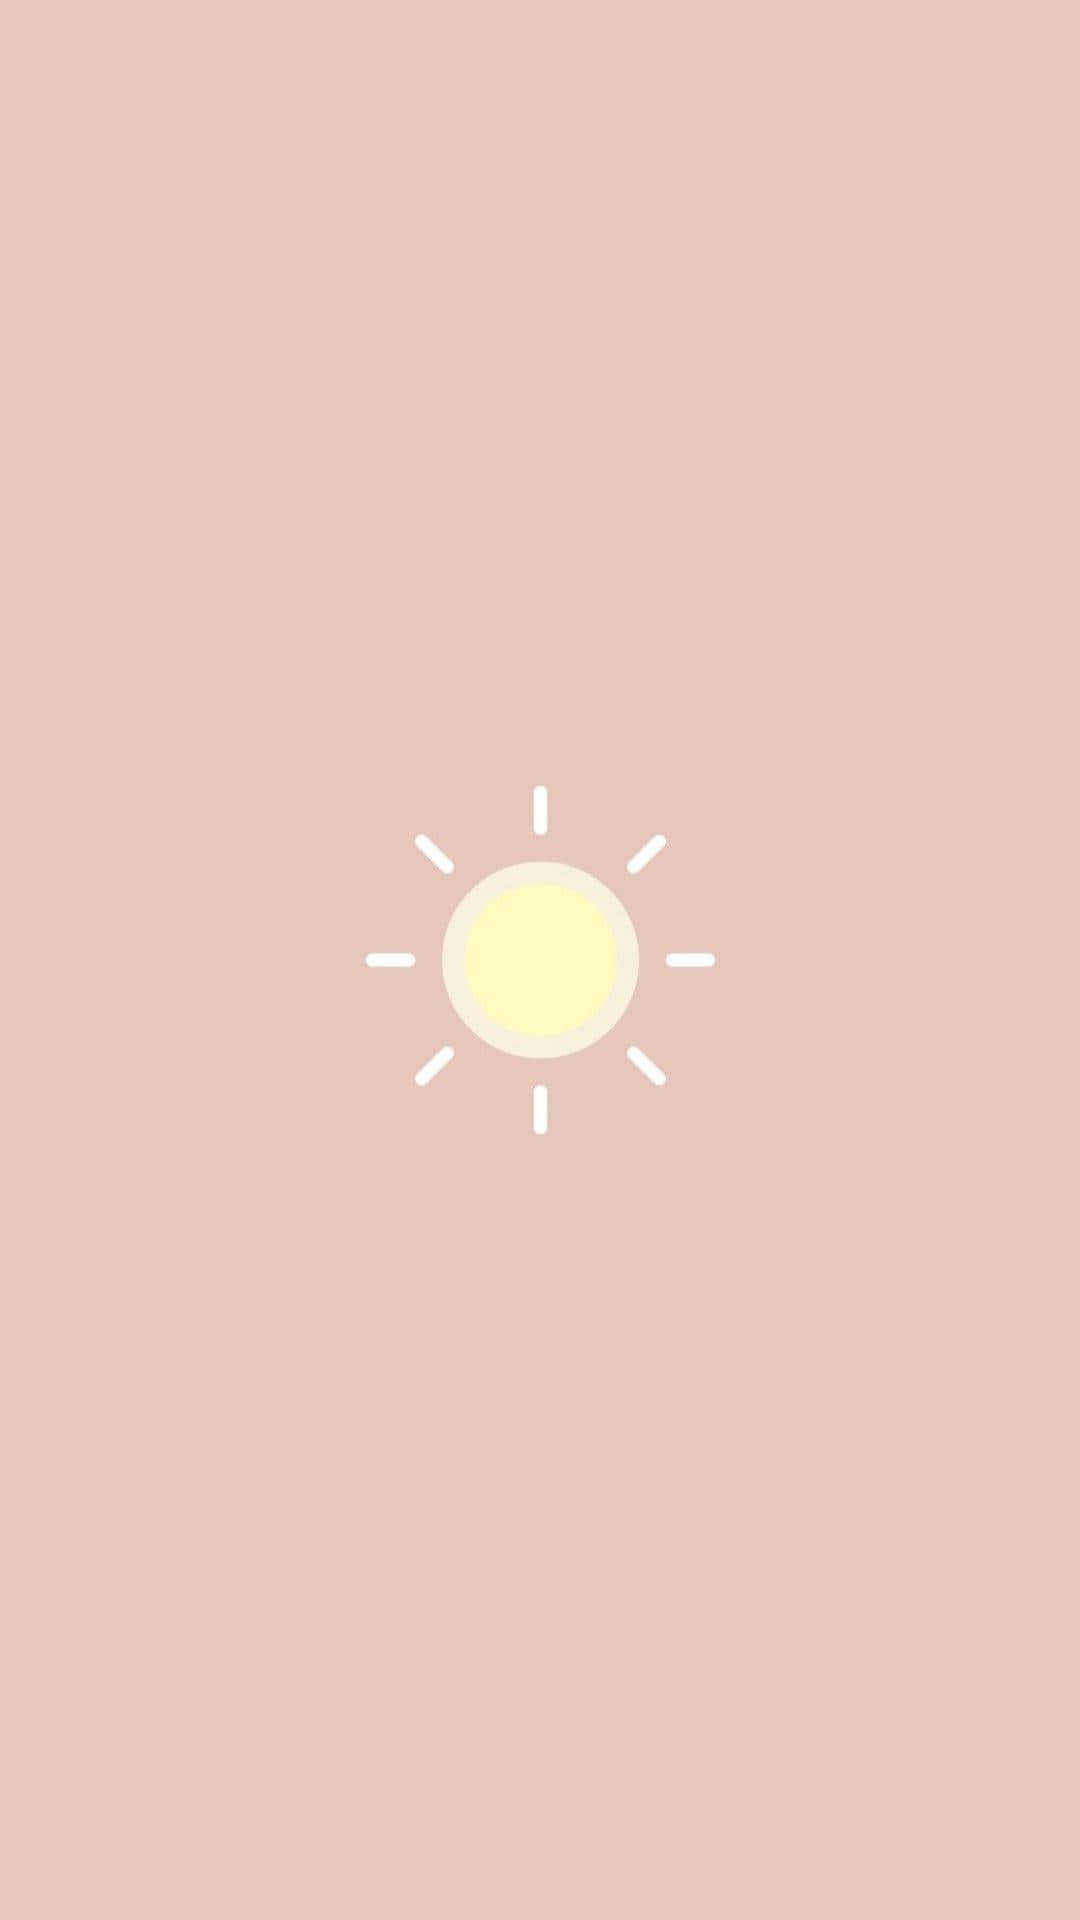 Brighten Up Your Day with this Cute Sun Wallpaper